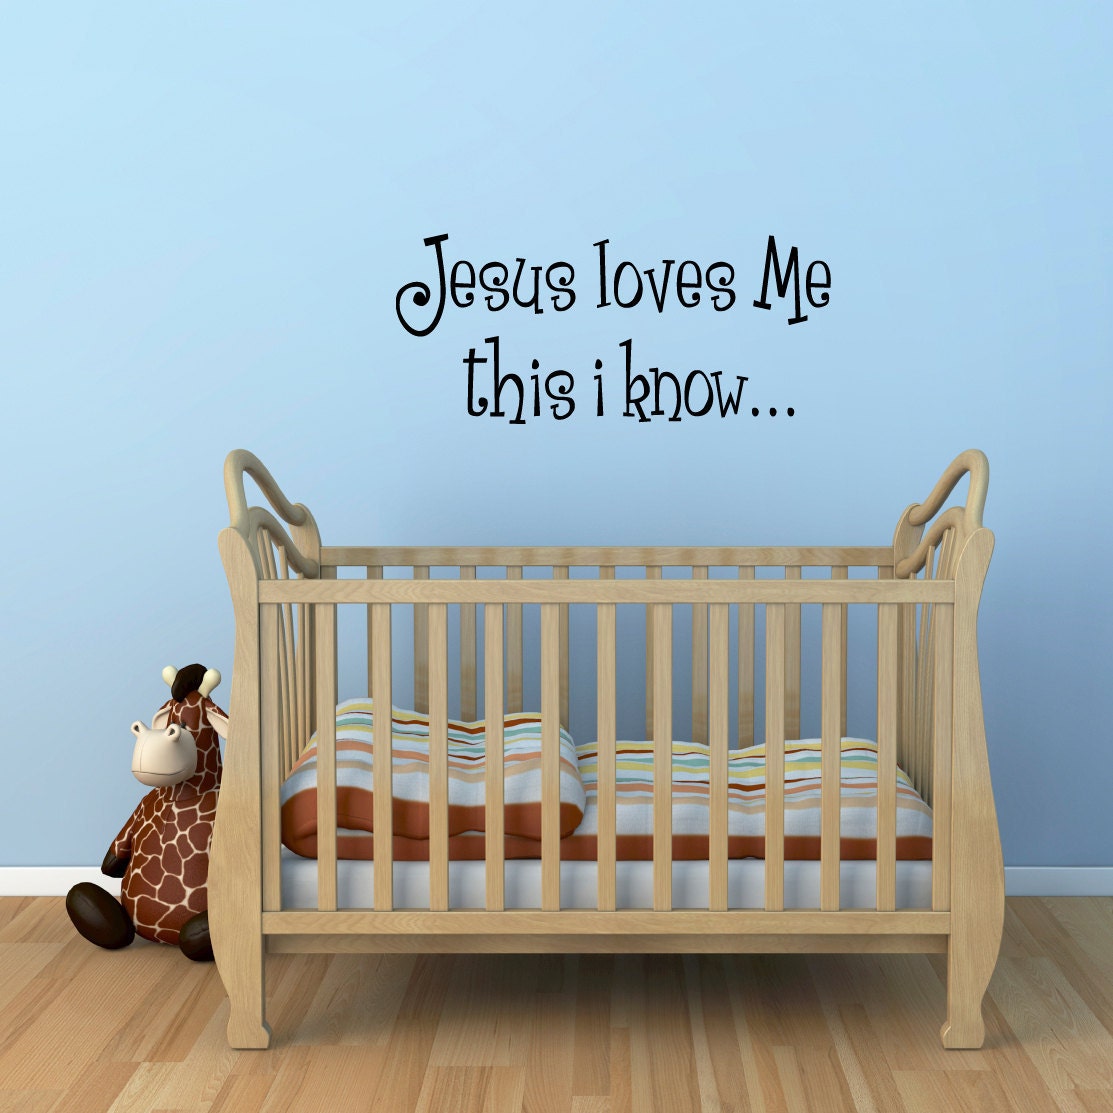 Jesus Loves Me Wall Decal - Bible Verse Wall Sticker - Christian Decal